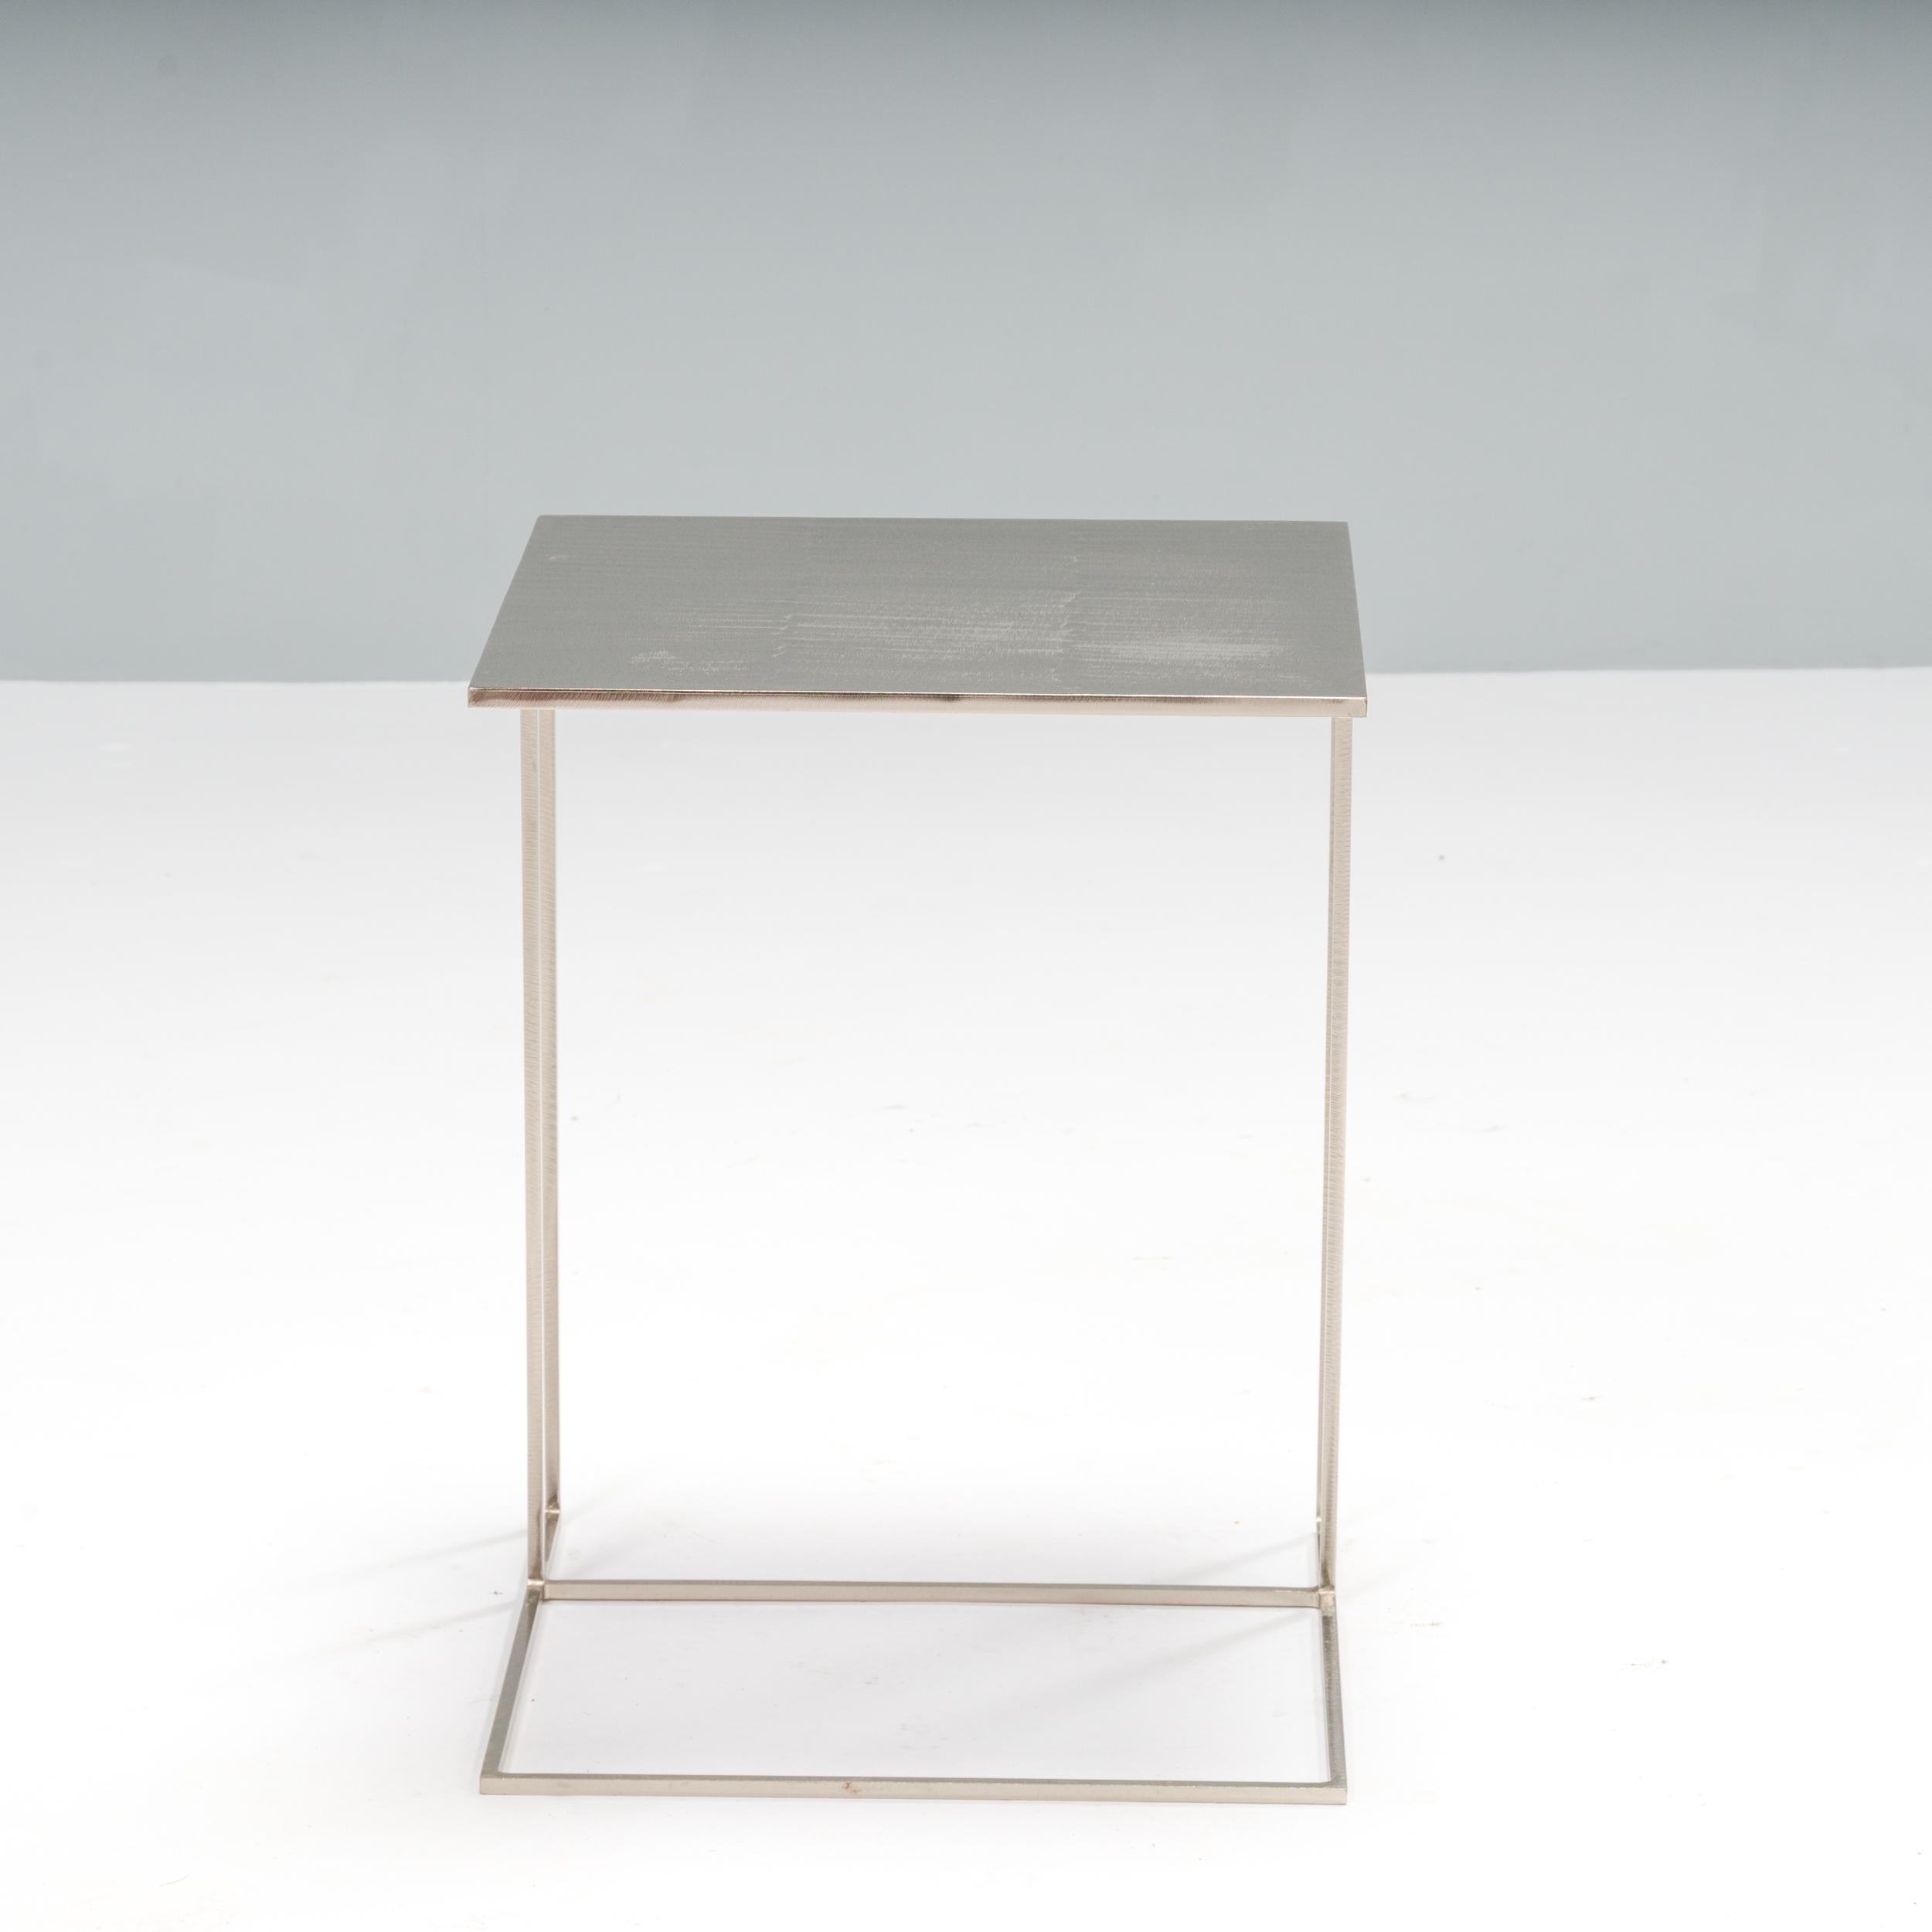 Designed by Rodolfo Dordoni for Minotti, the Leger side table formed part of the 1998 Collection which celebrated simple, elegant shapes and linear style.

Constructed from brushed steel, this side table has a sleek silhouette.

The cantilever